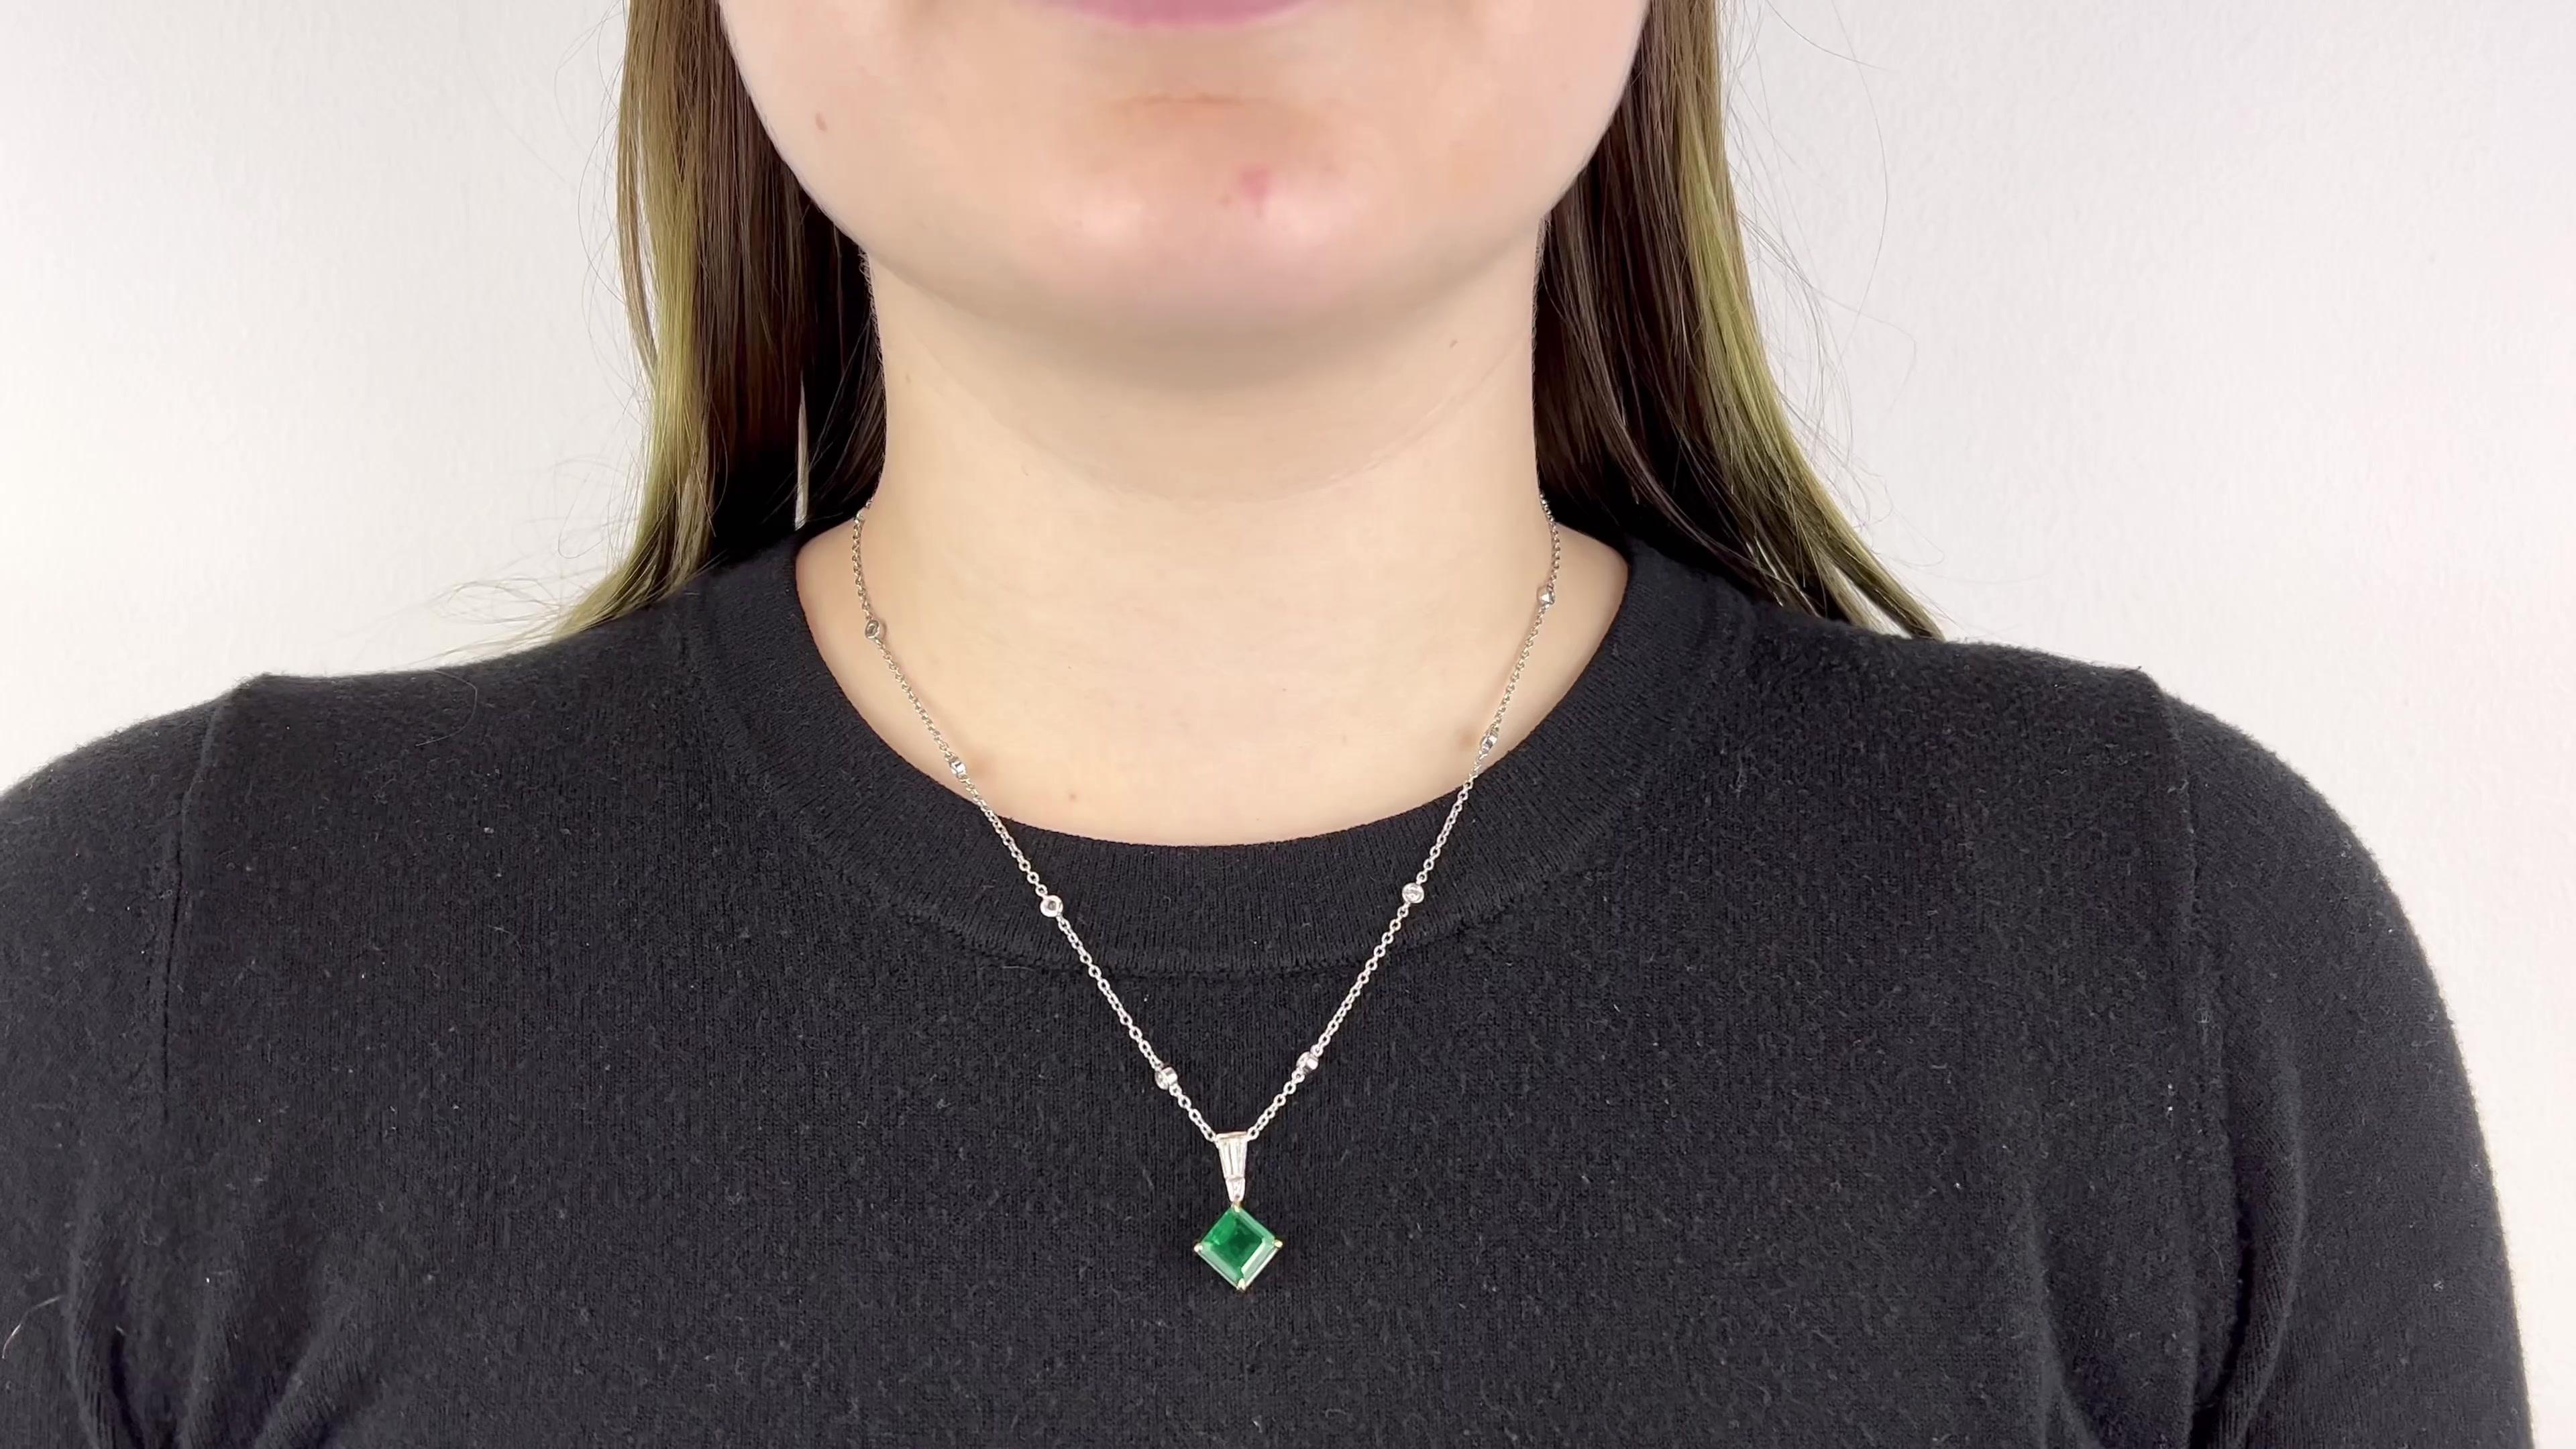 One Vintage GIA Emerald Diamond 18 Karat White Gold Pendant Necklace. Featuring one square emerald of approximately 2.40 carats, accompanied with certificate #2225307636. Accented by two tapered baguette cut diamonds with a total weight of